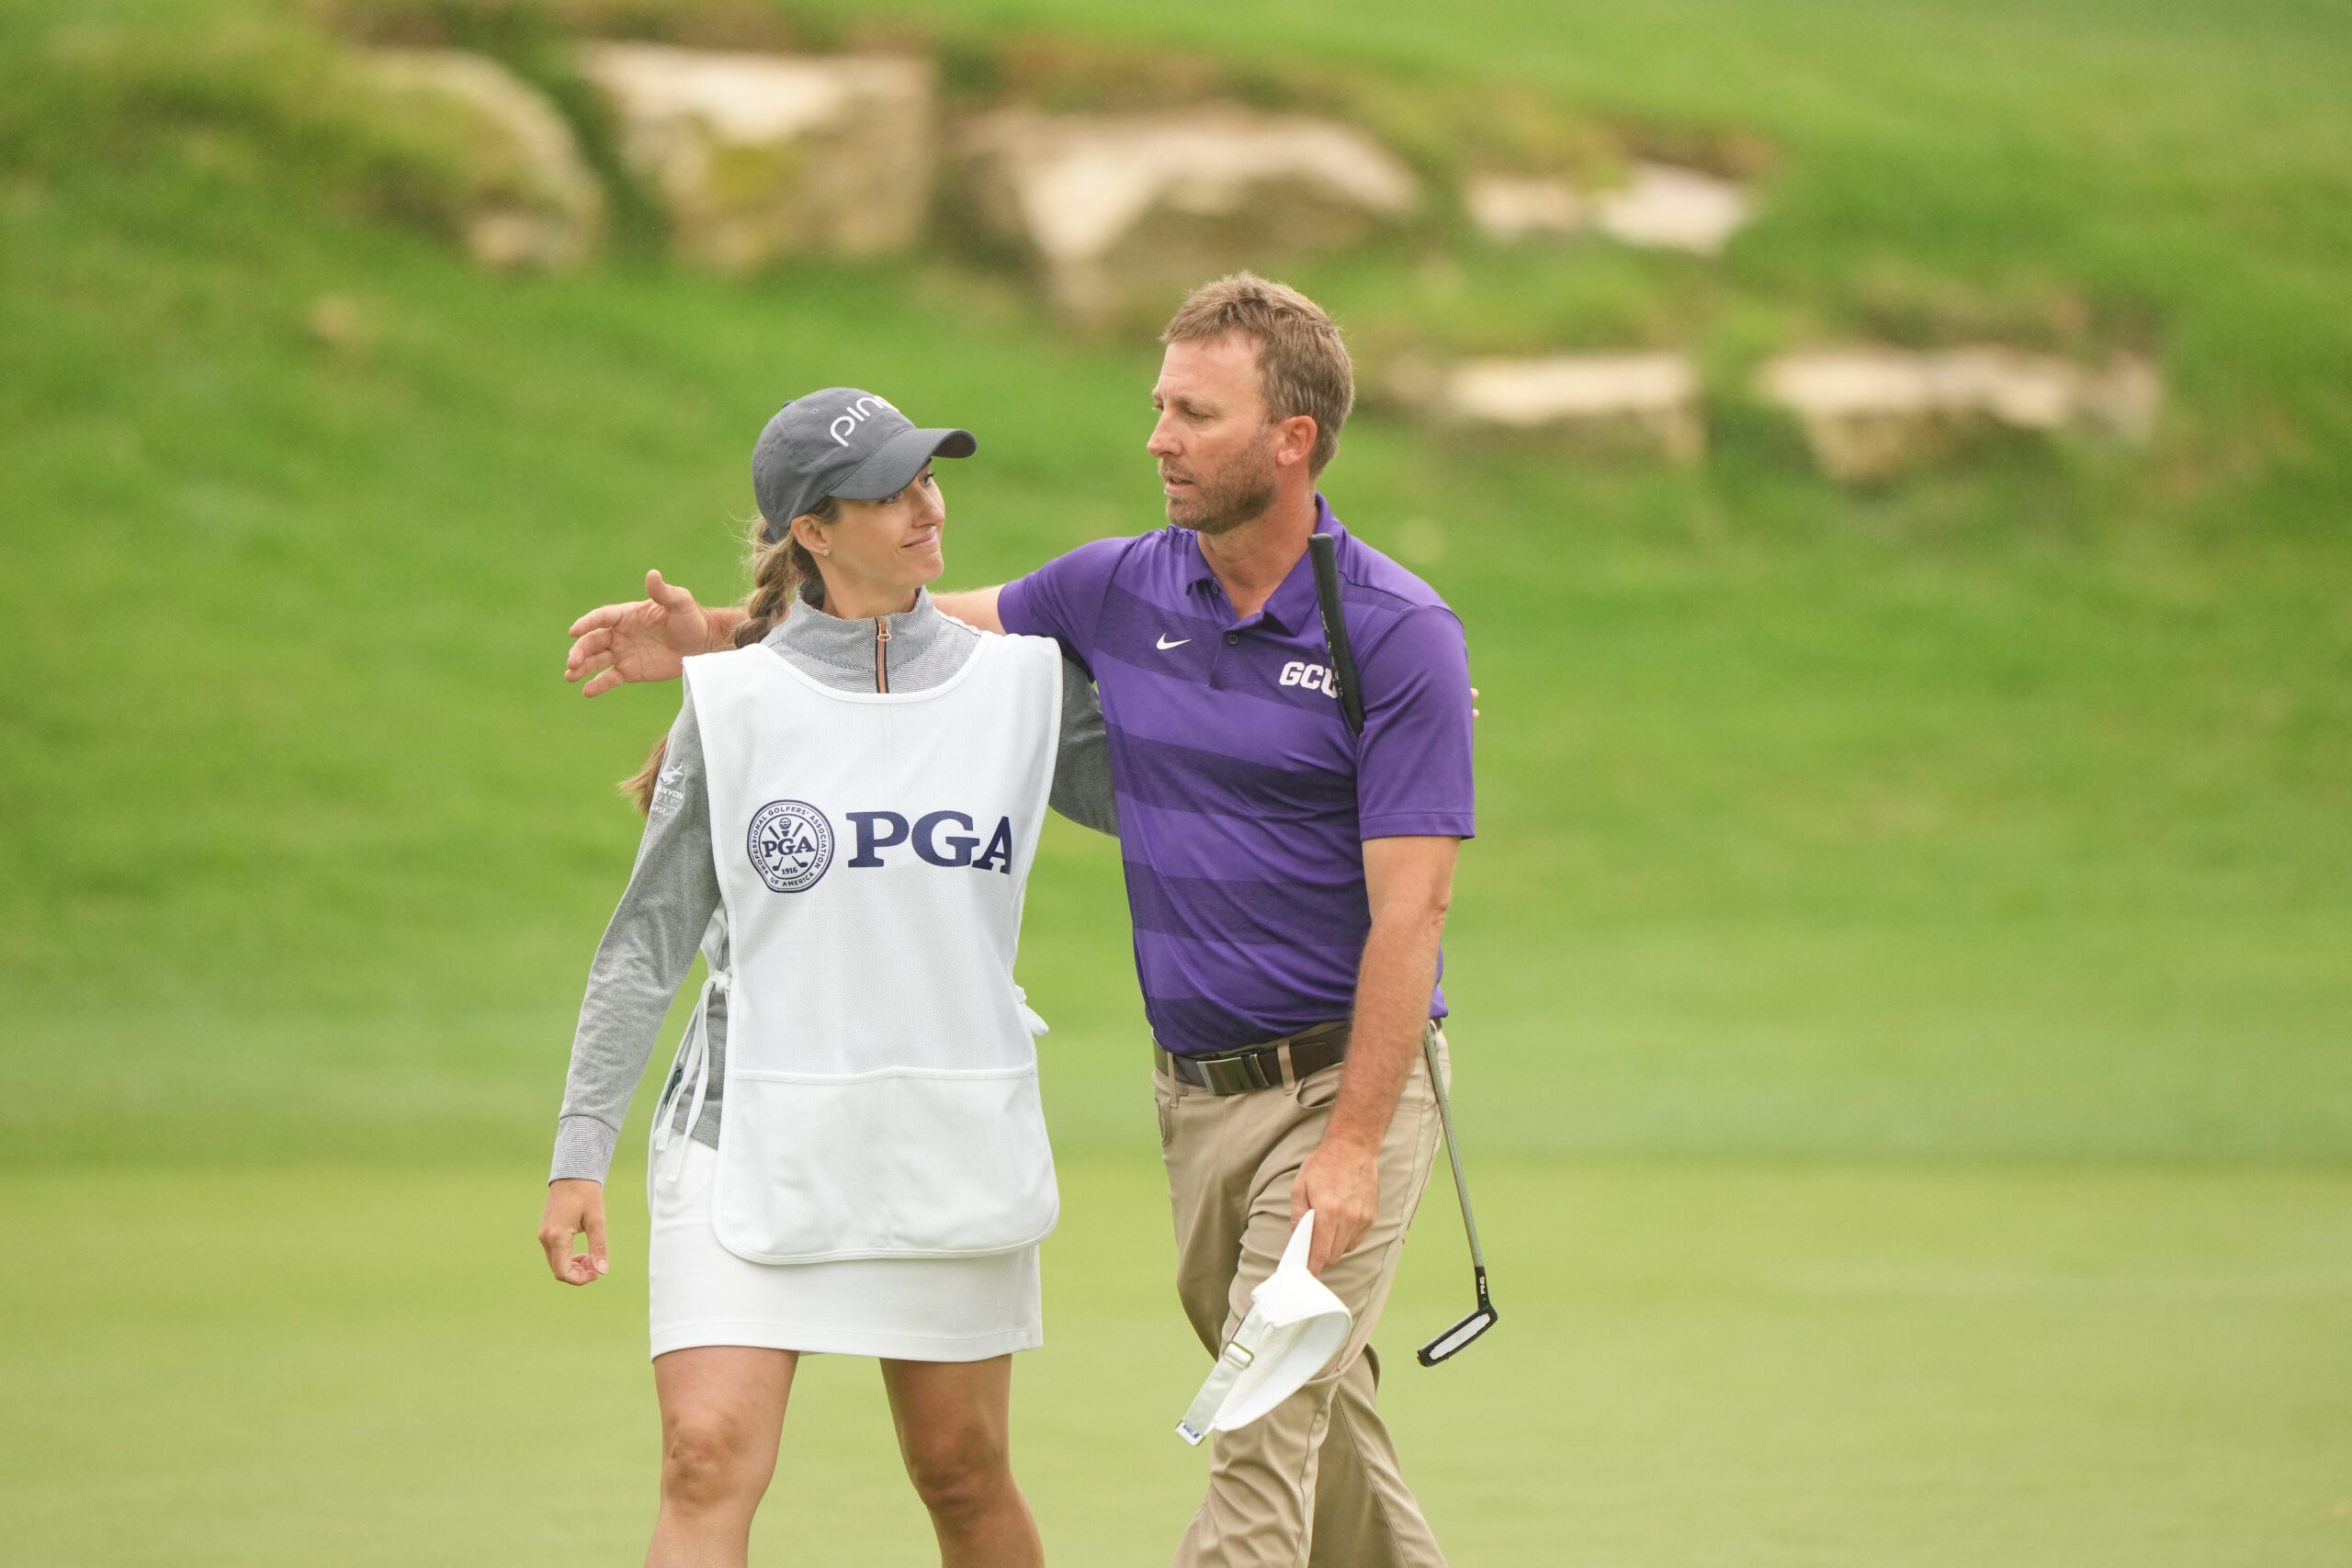 With wife as caddie, Jesse Mueller wins PGA Professional Championship, earns one of 20 PGA Championship berths